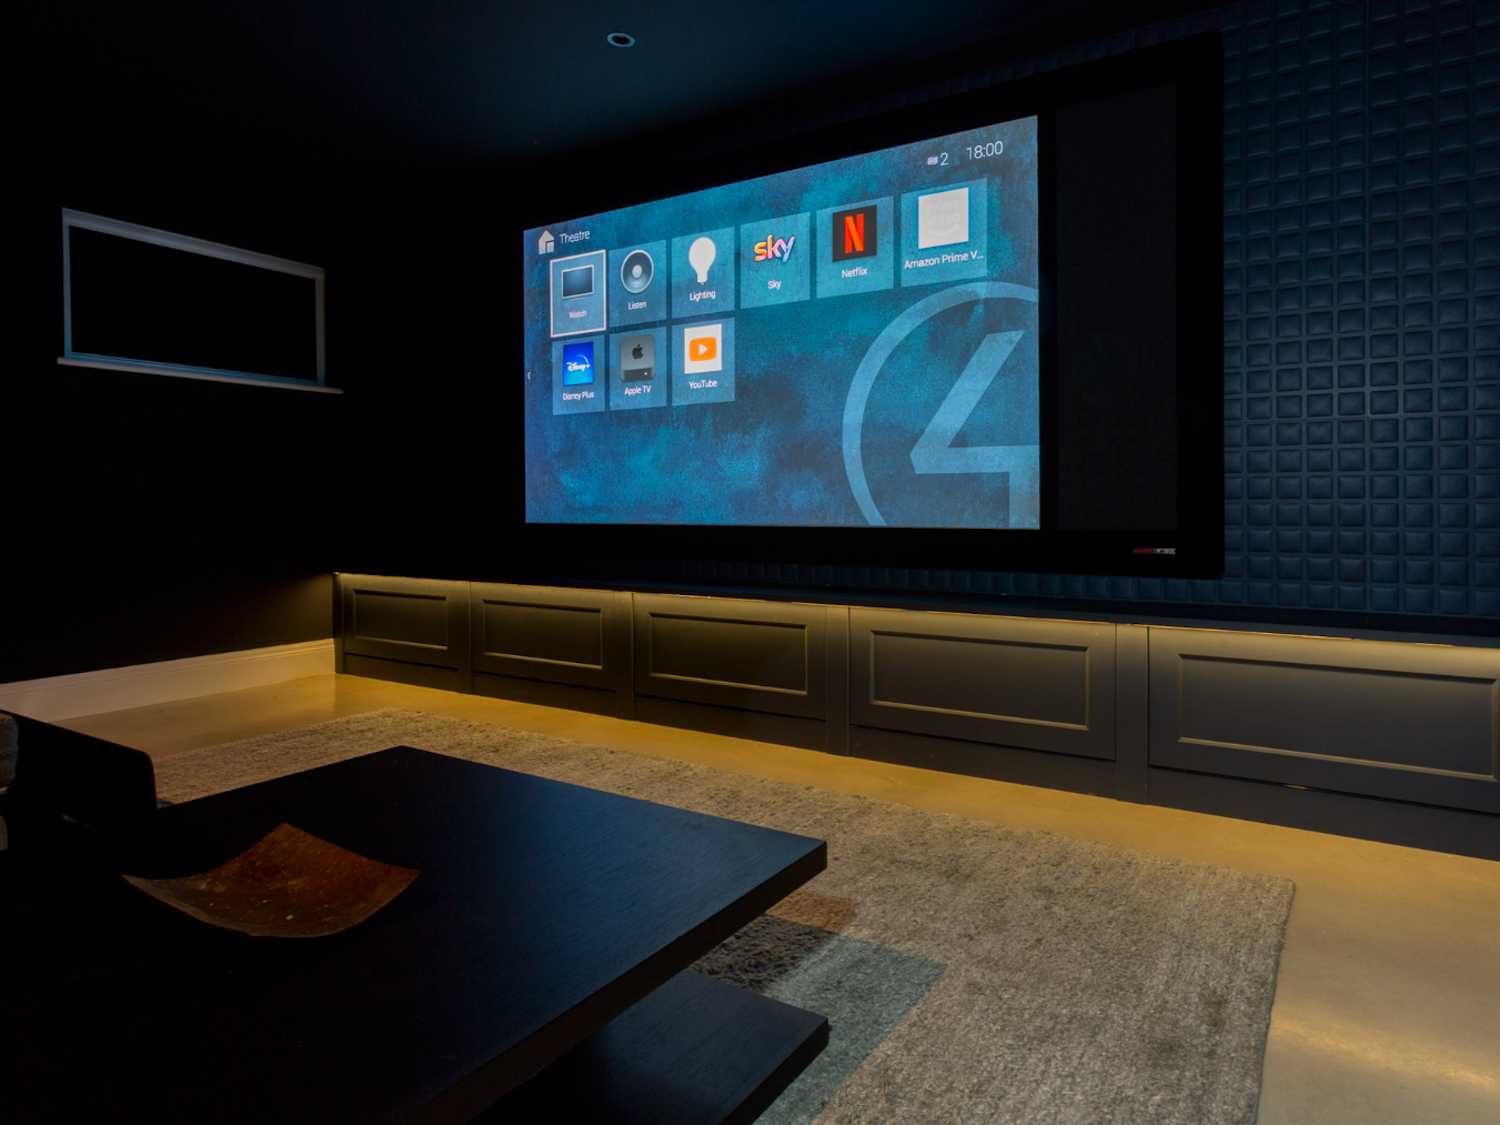 Content is easily accessed via the Control4 home automation and control system